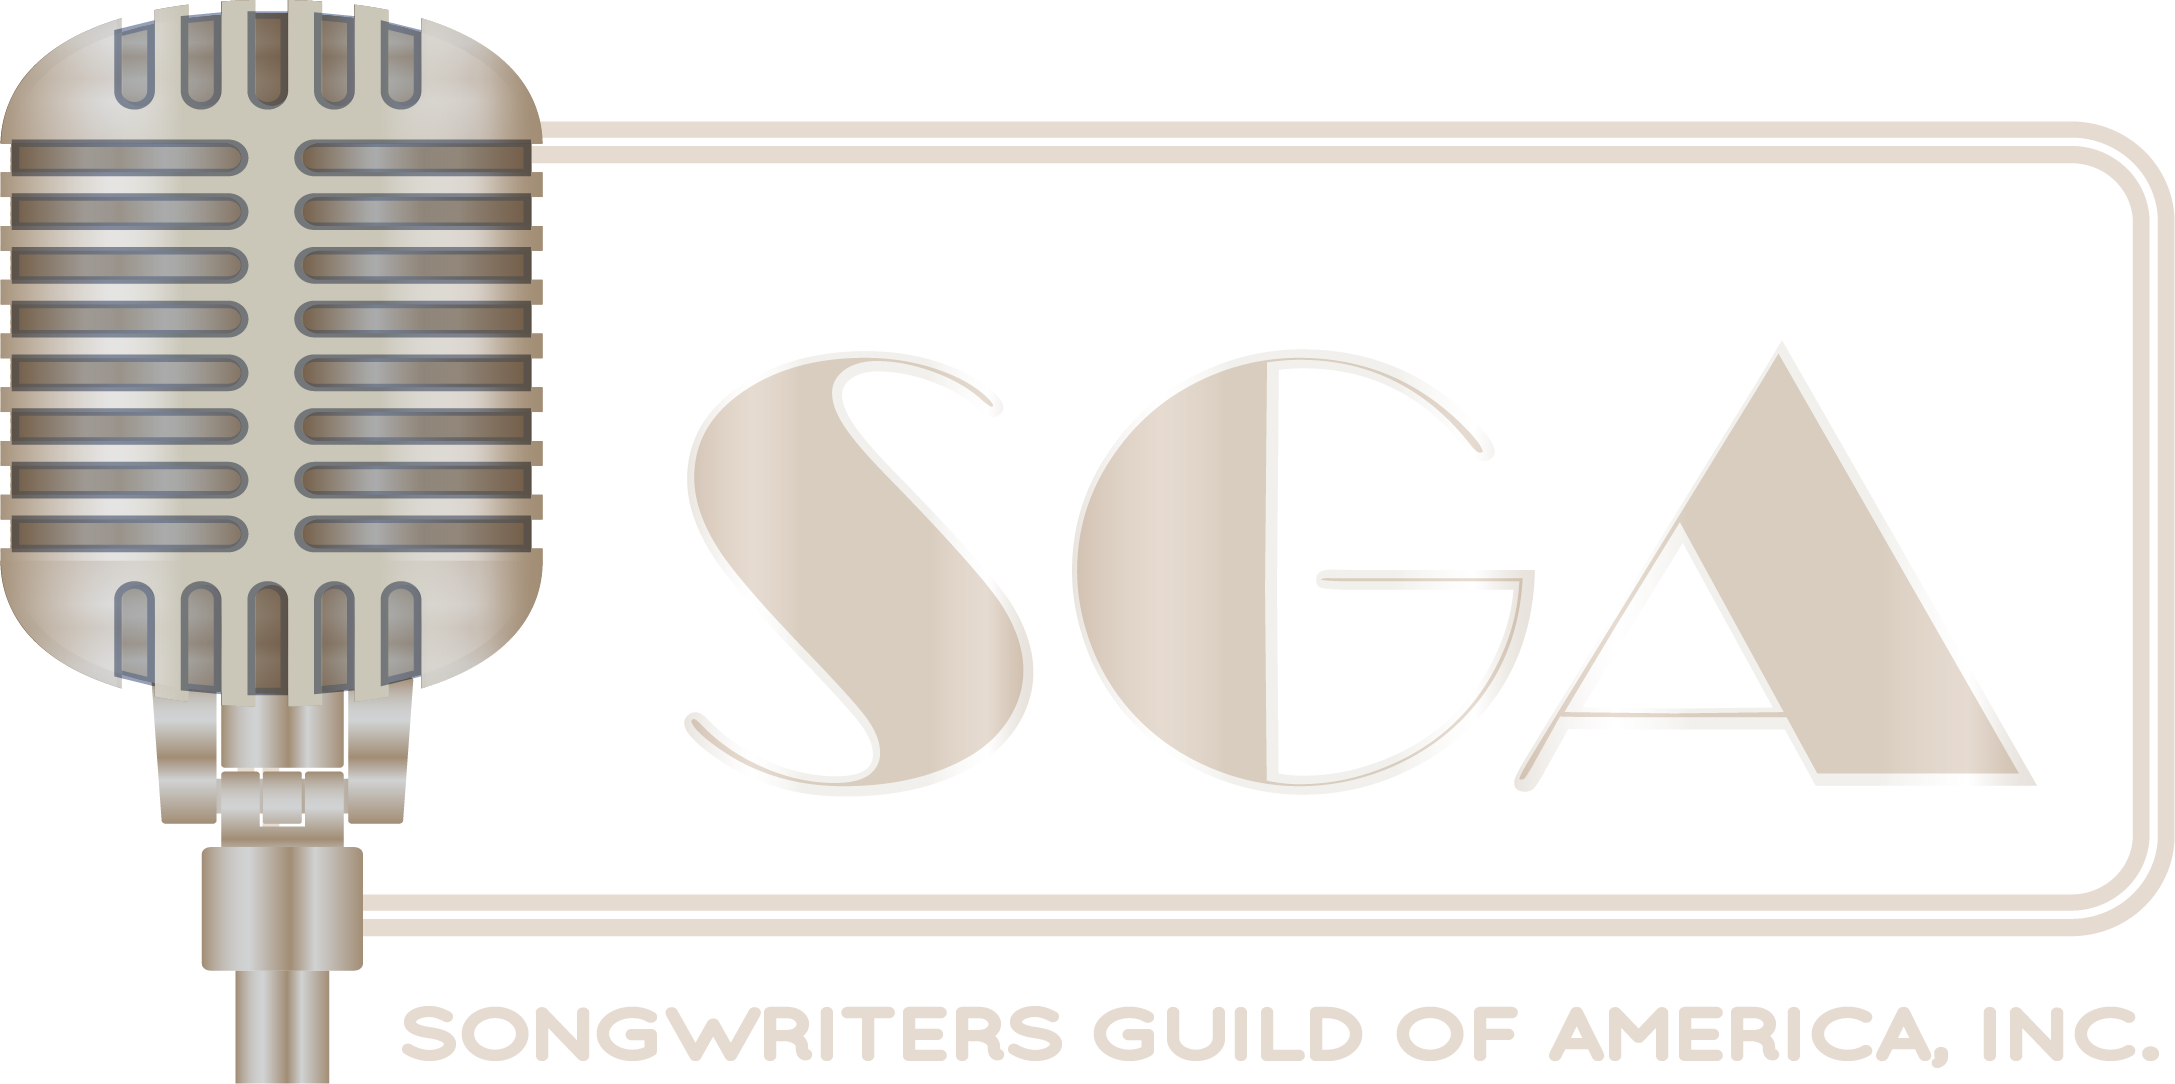 Songwriters Guild of America